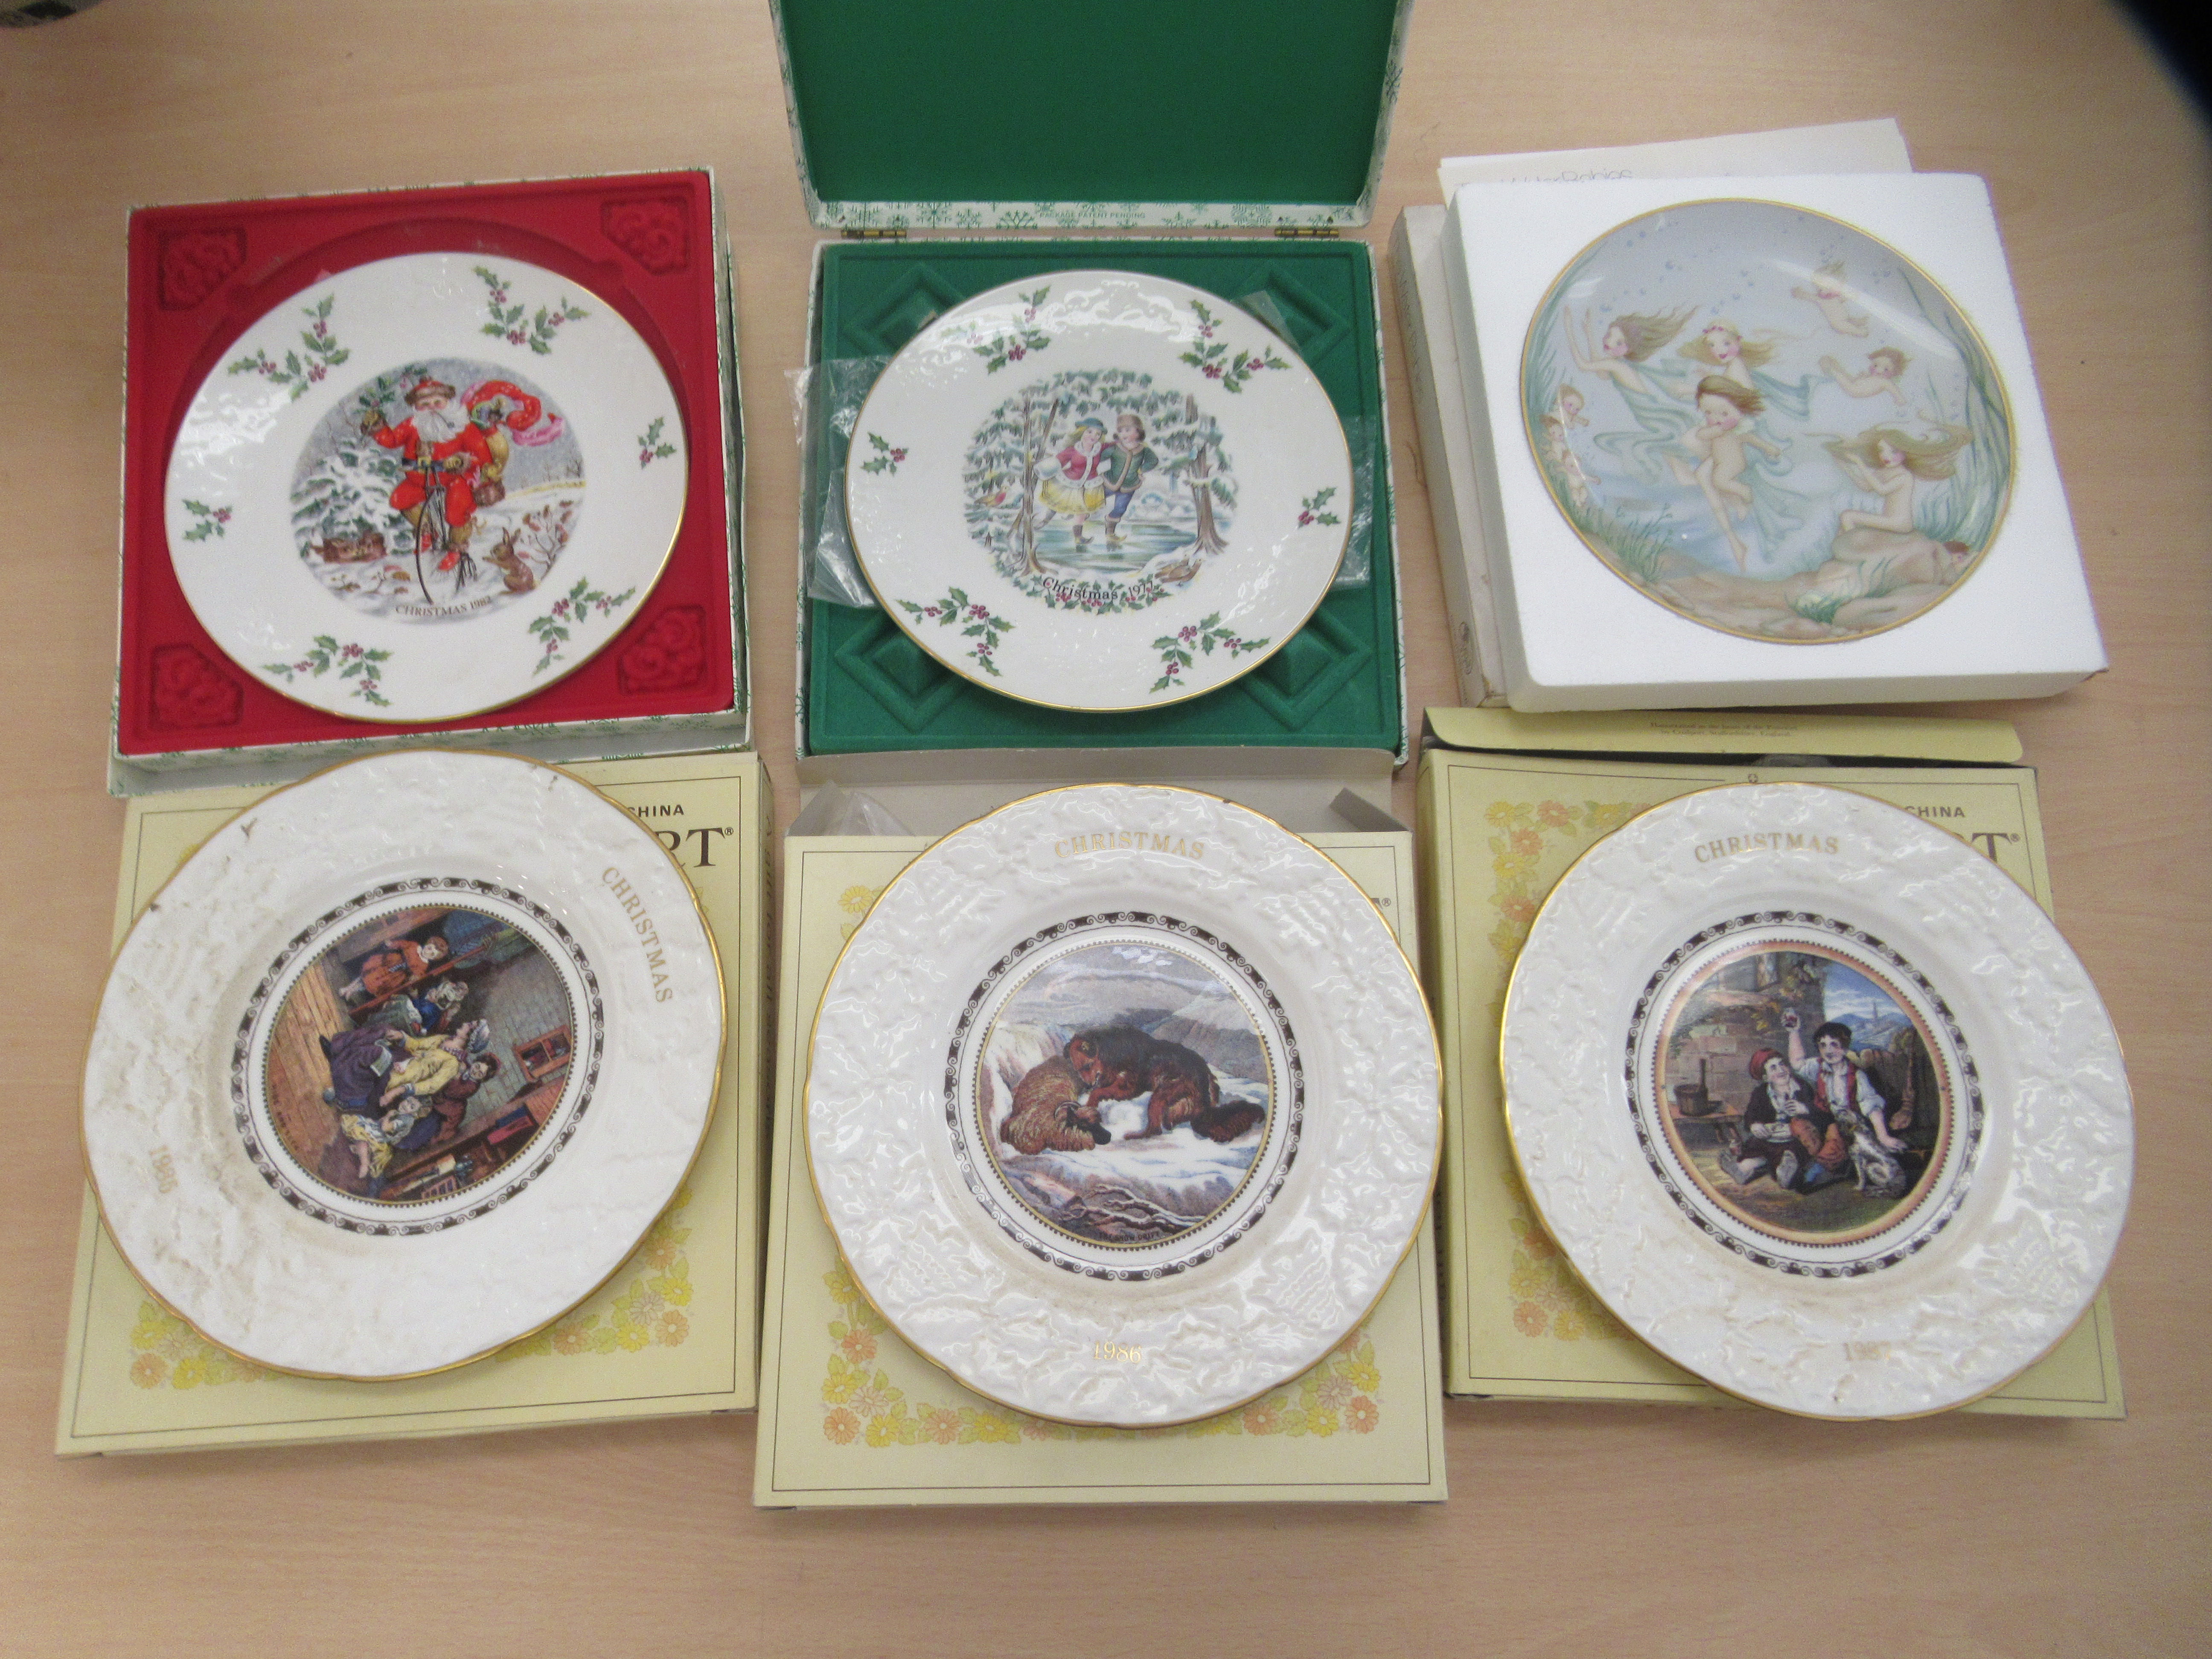 Decorative ceramics, mainly plates with examples by Coalport and Royal Doulton  9"-11"dia  some - Image 2 of 5